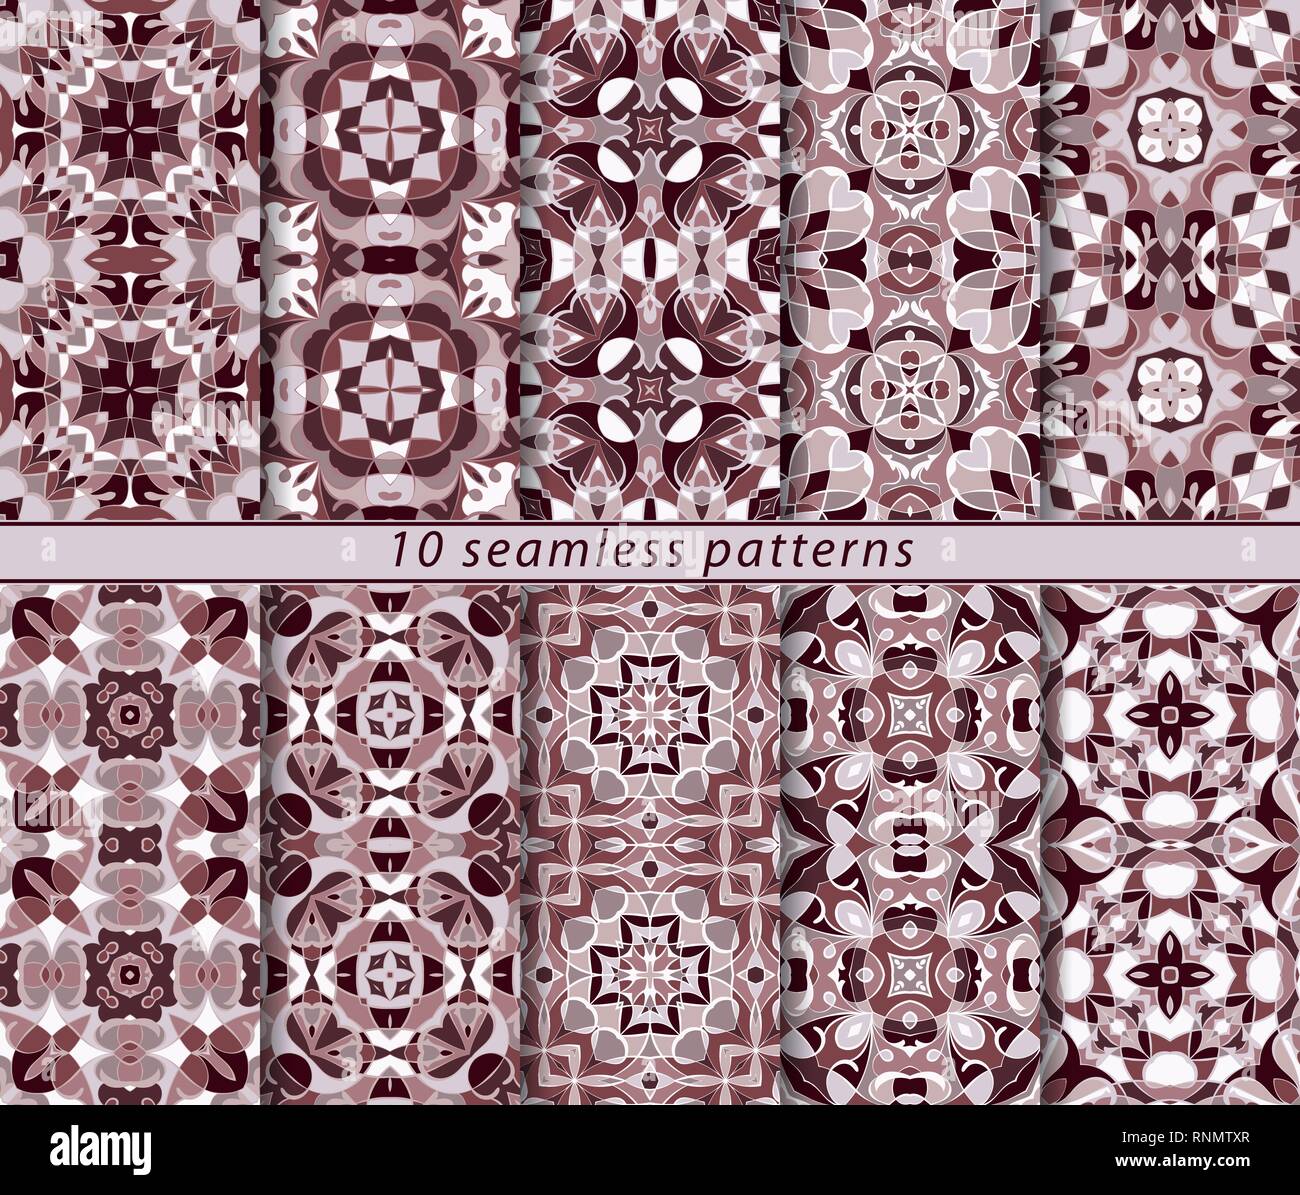 Ten seamless patterns in Oriental style. Eastern ornaments for design fabric, wrapping paper or scrapbooking. Vector illustration in dark red colors. Stock Vector